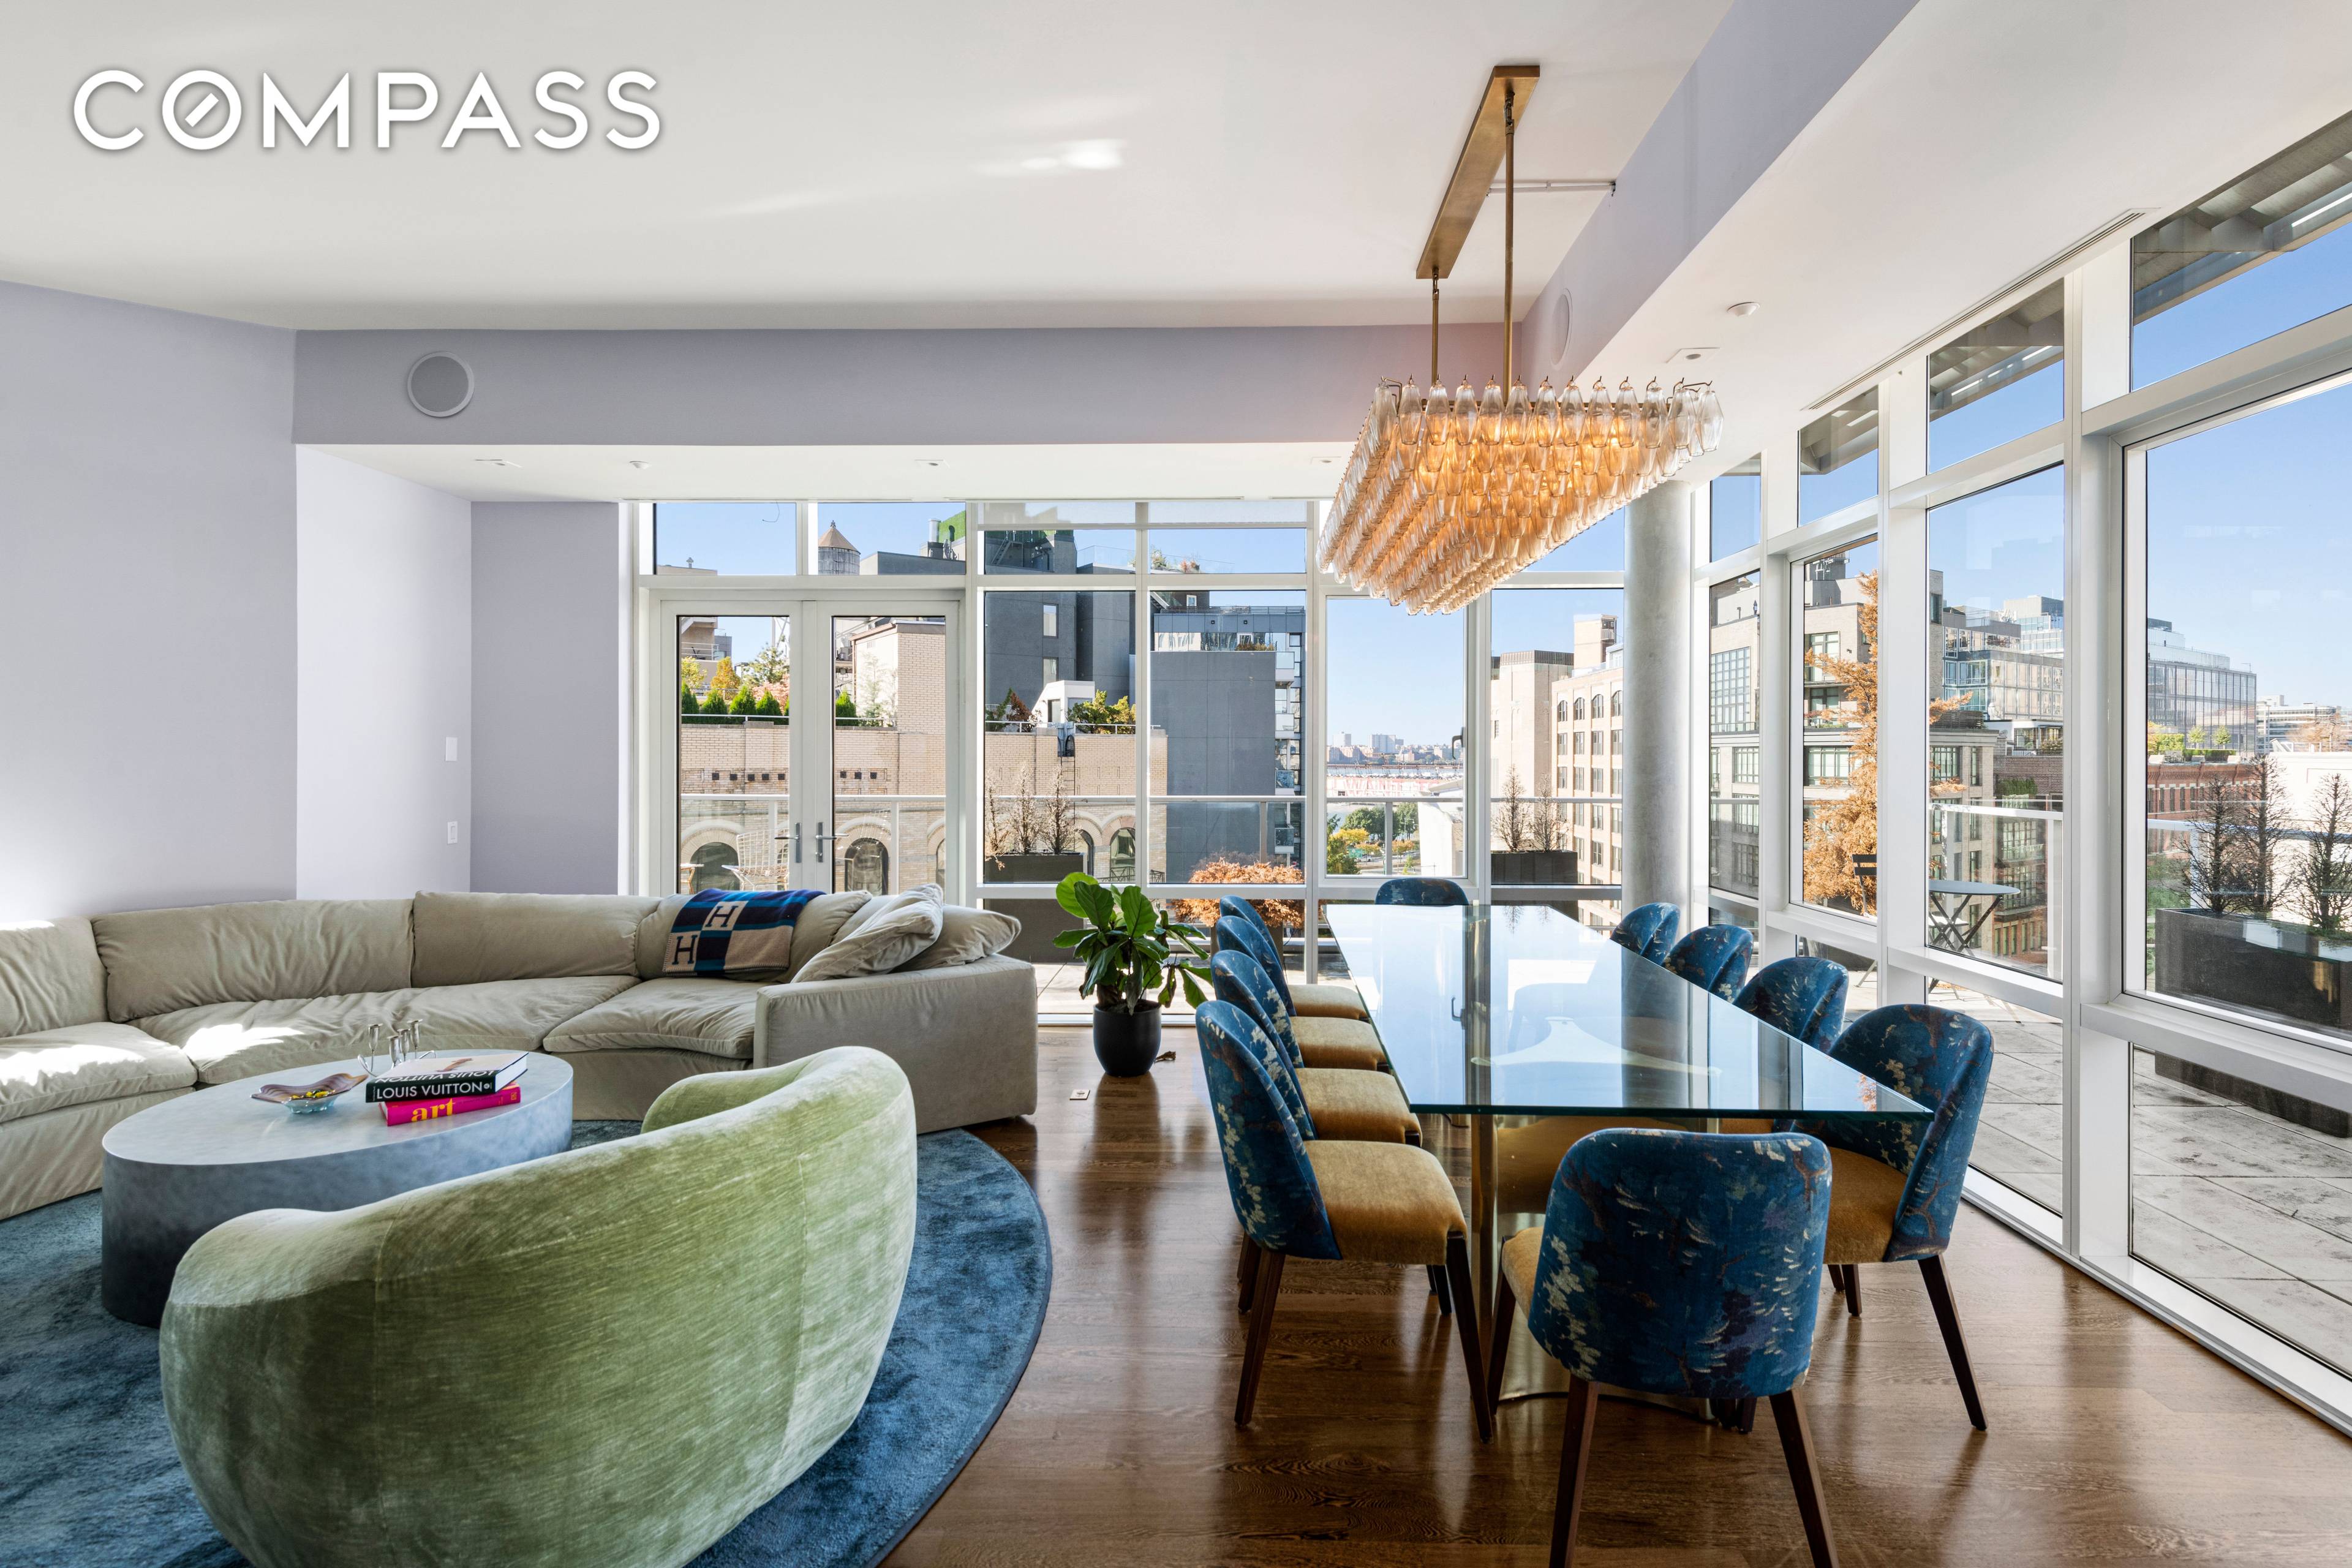 Stunning duplex penthouse residence, with a private 981sf roof deck, in addition to a 770sf wrap terrace on the main level, and a wood burning fireplace in a full service ...